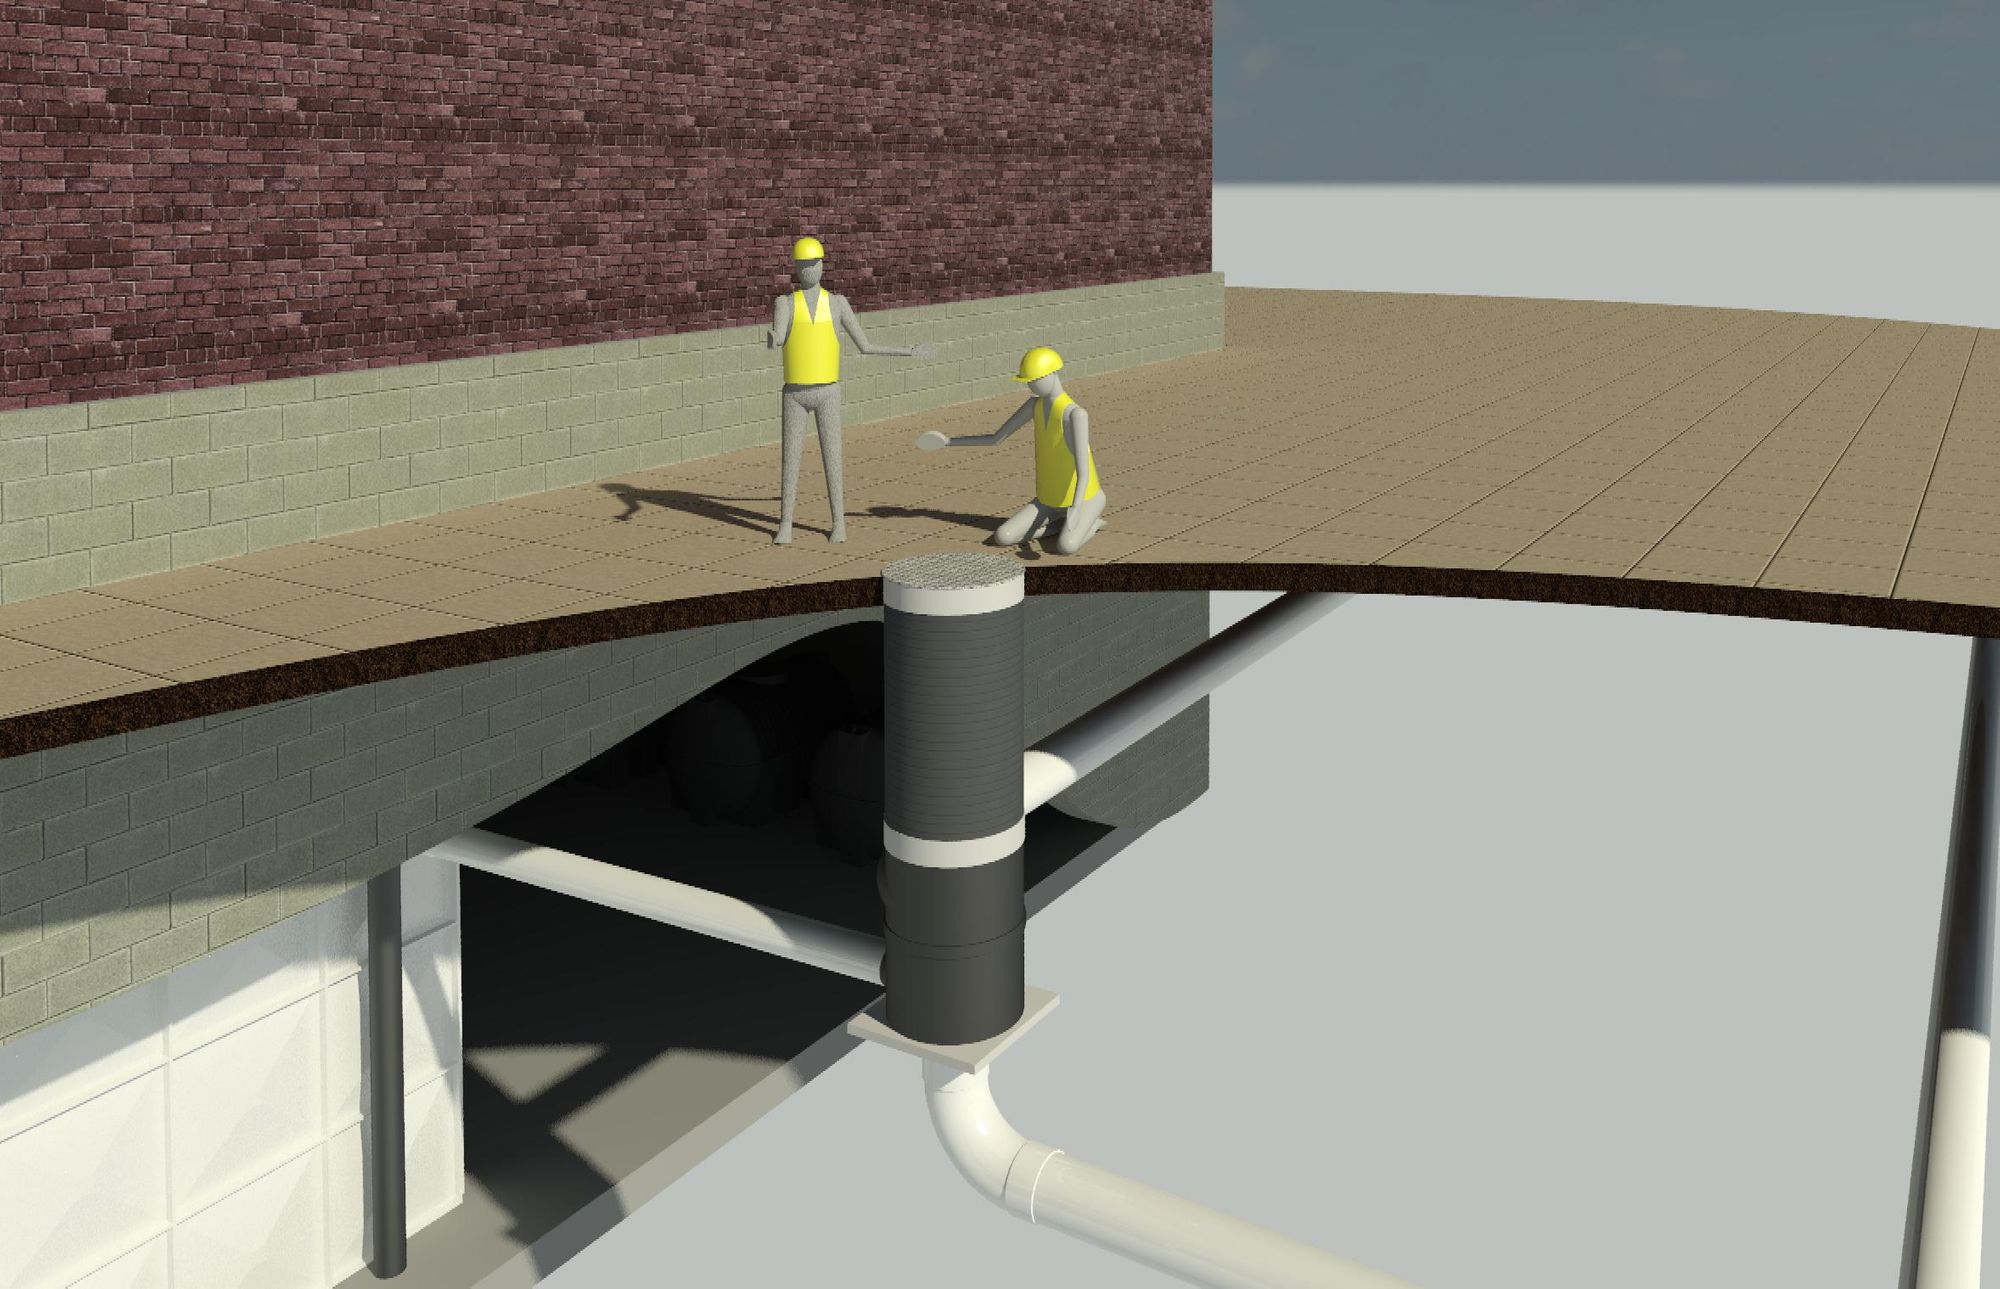 Render showing water filter and tank piped up.